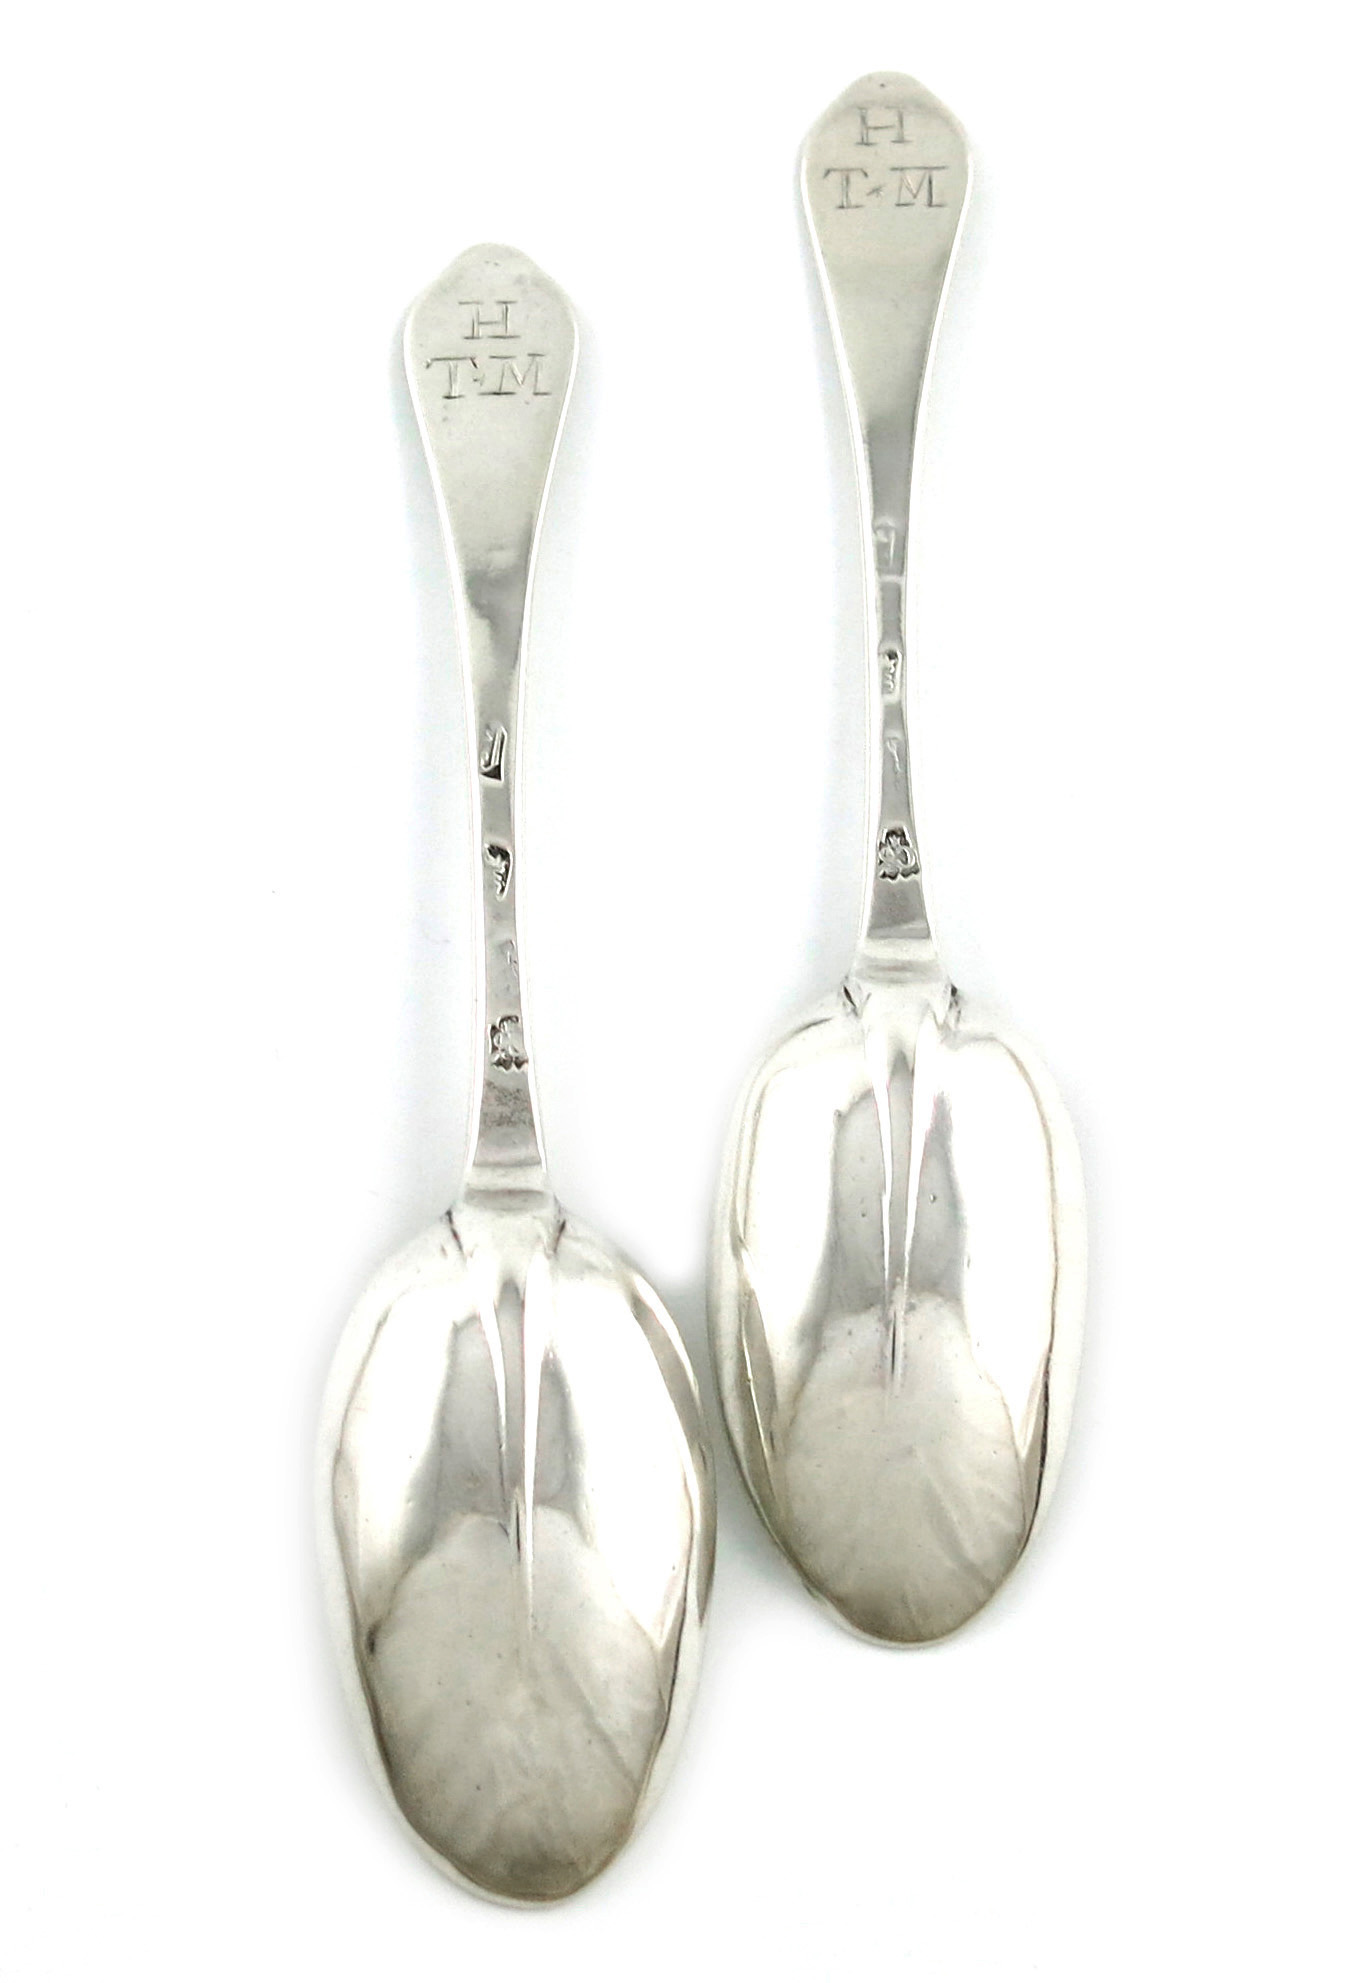 A pair of Queen Anne silver Dog-nose spoons, by George Cox, London 1705, the oval bowl with a